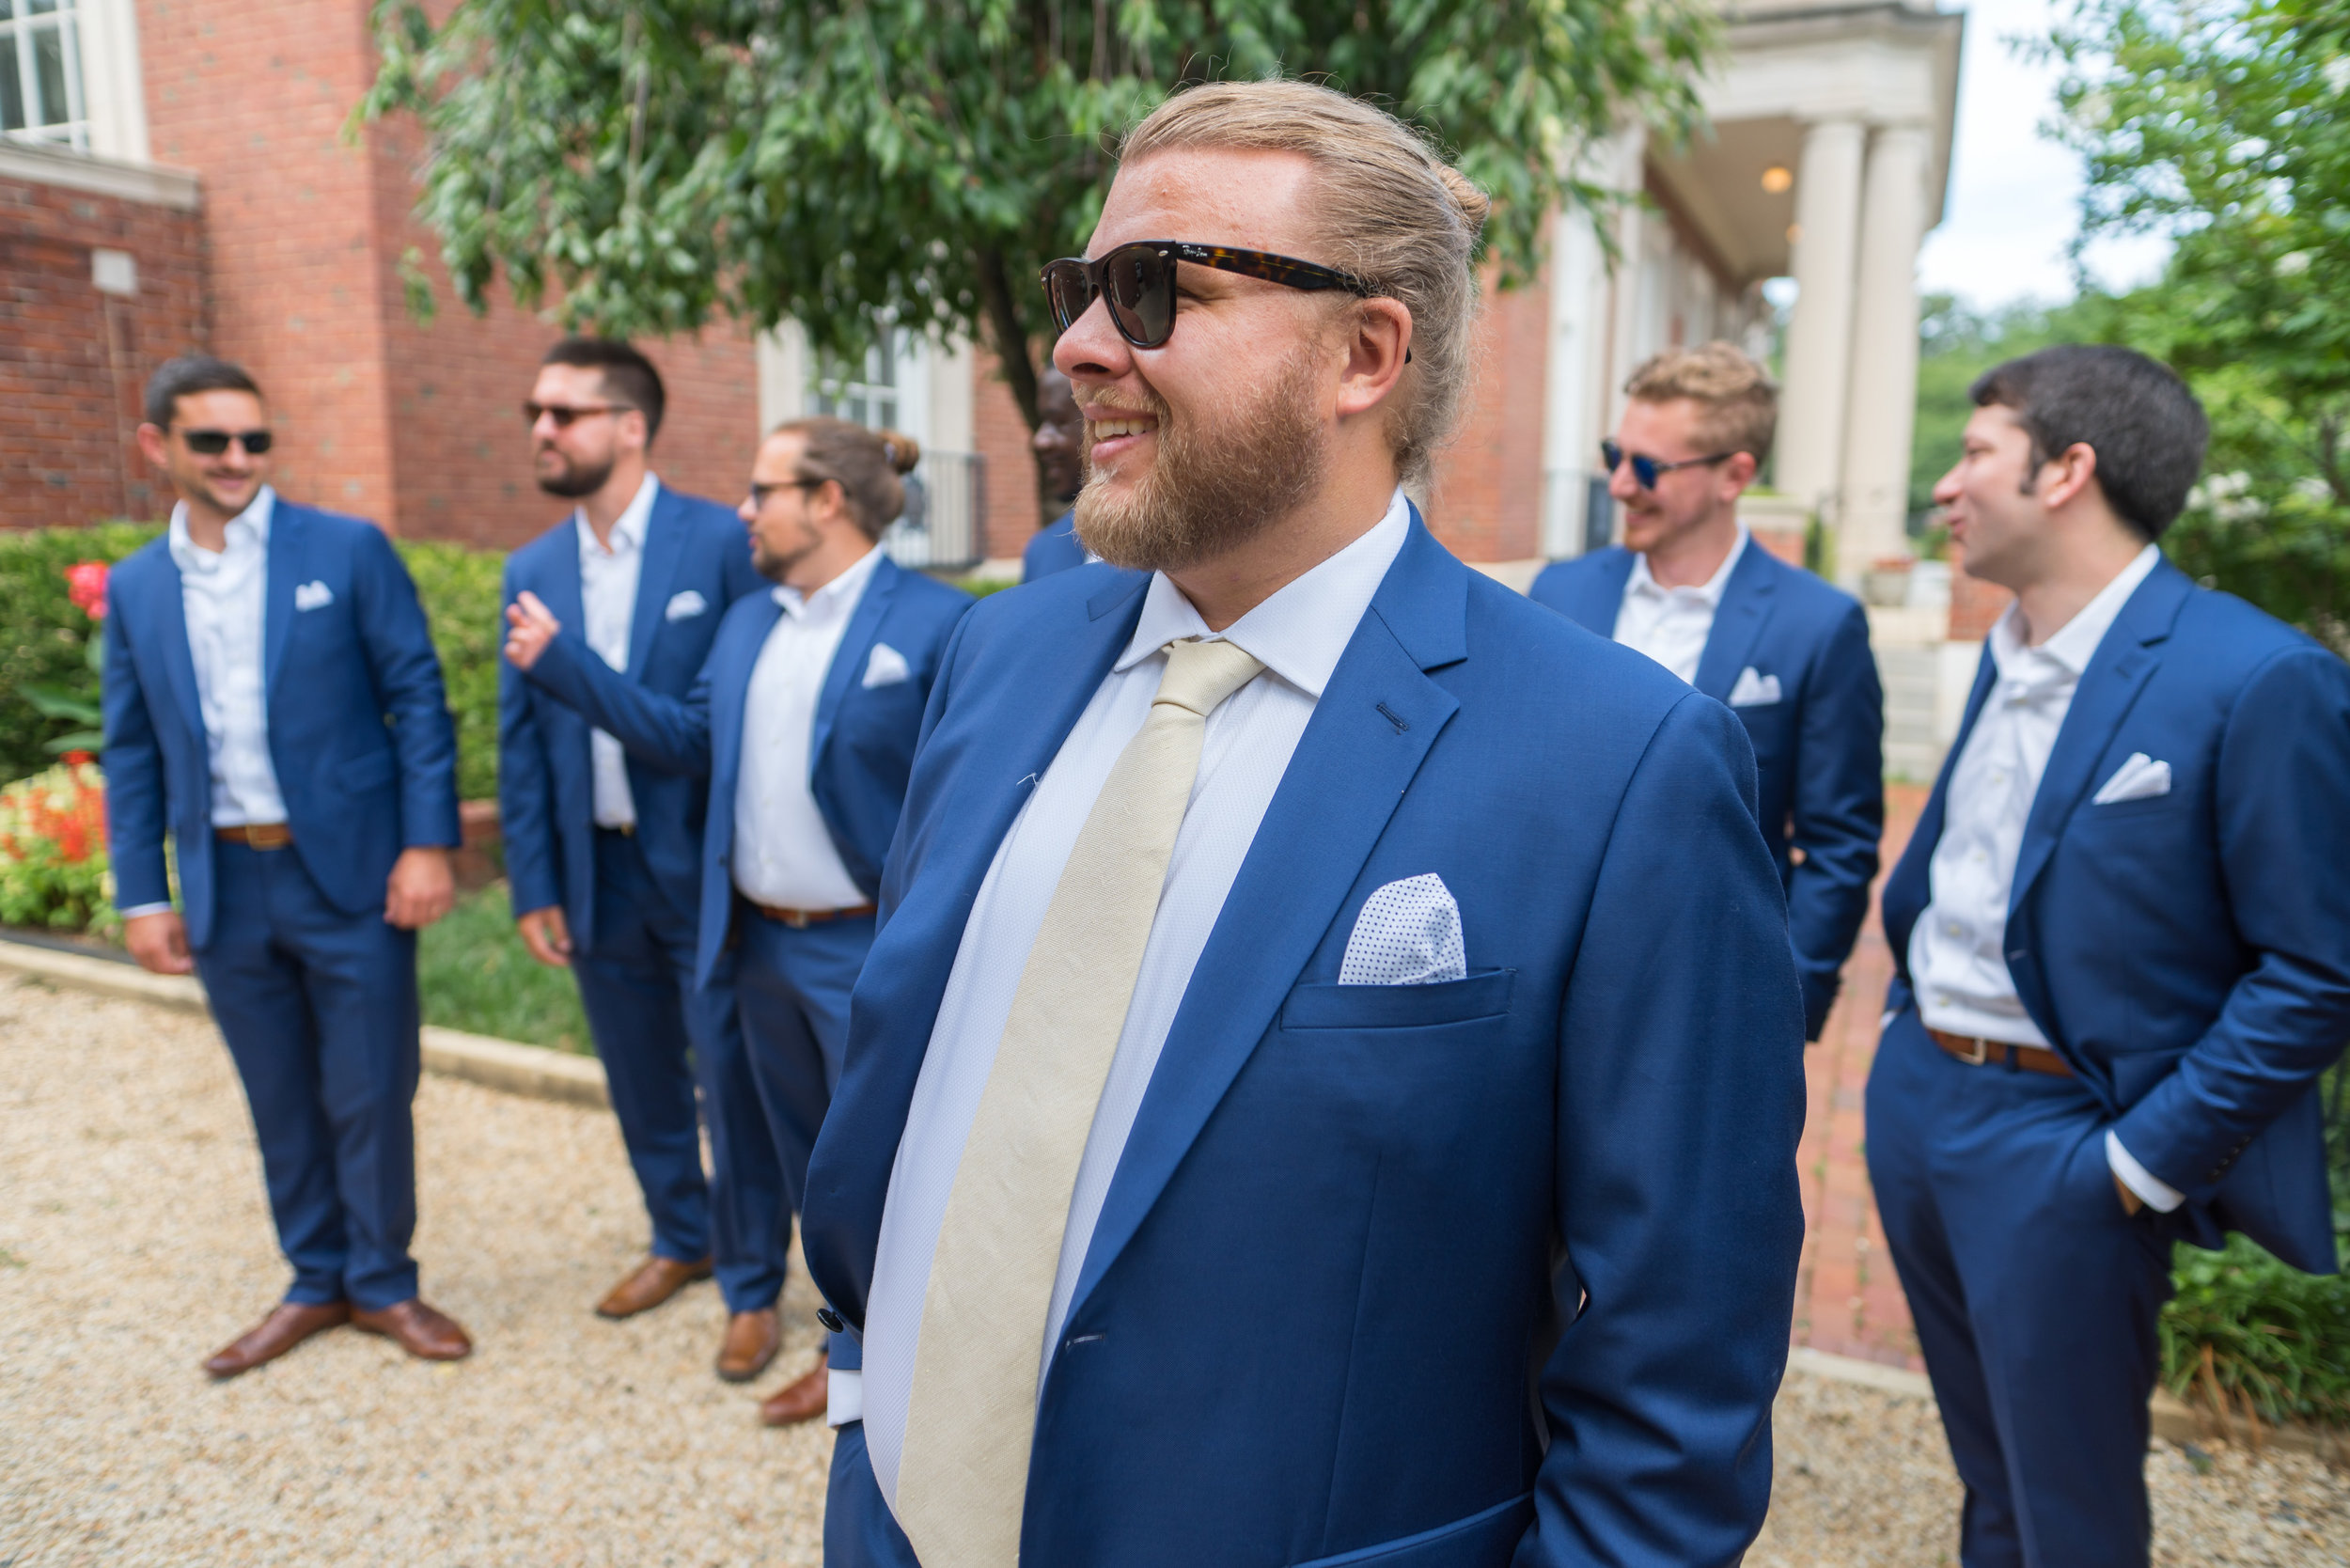 Groom and groomsmen in blue suit at a DC wedding 